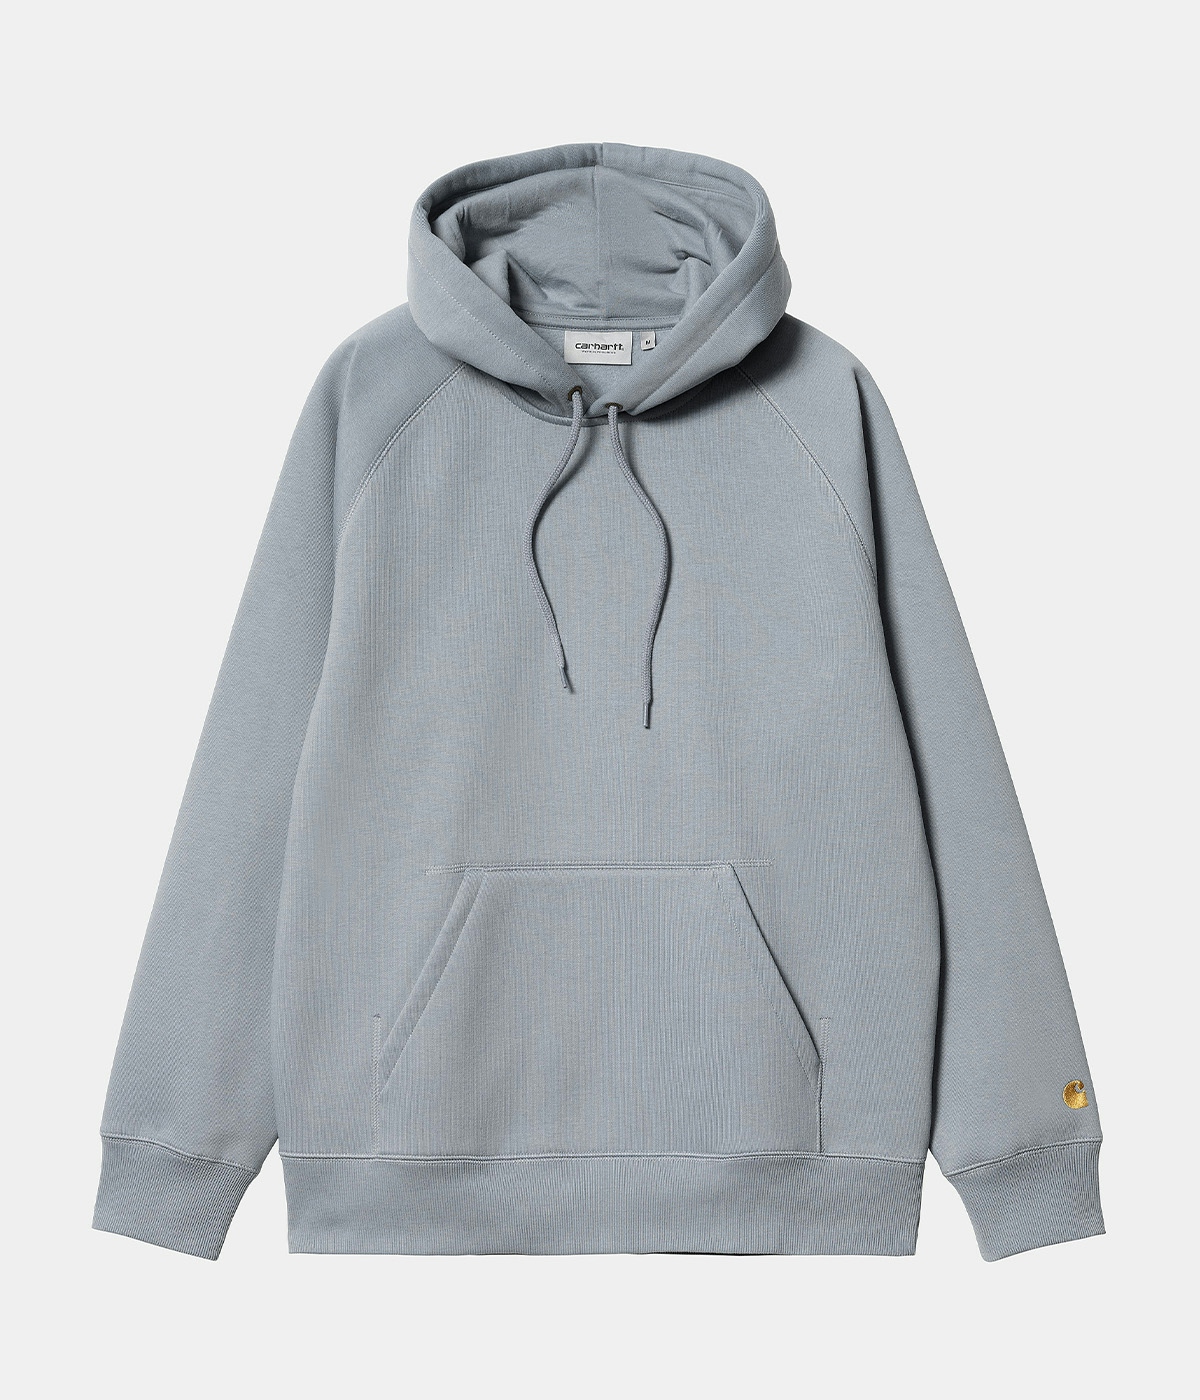 Carhartt Hooded Chase Sweater Mirror / Gold 1